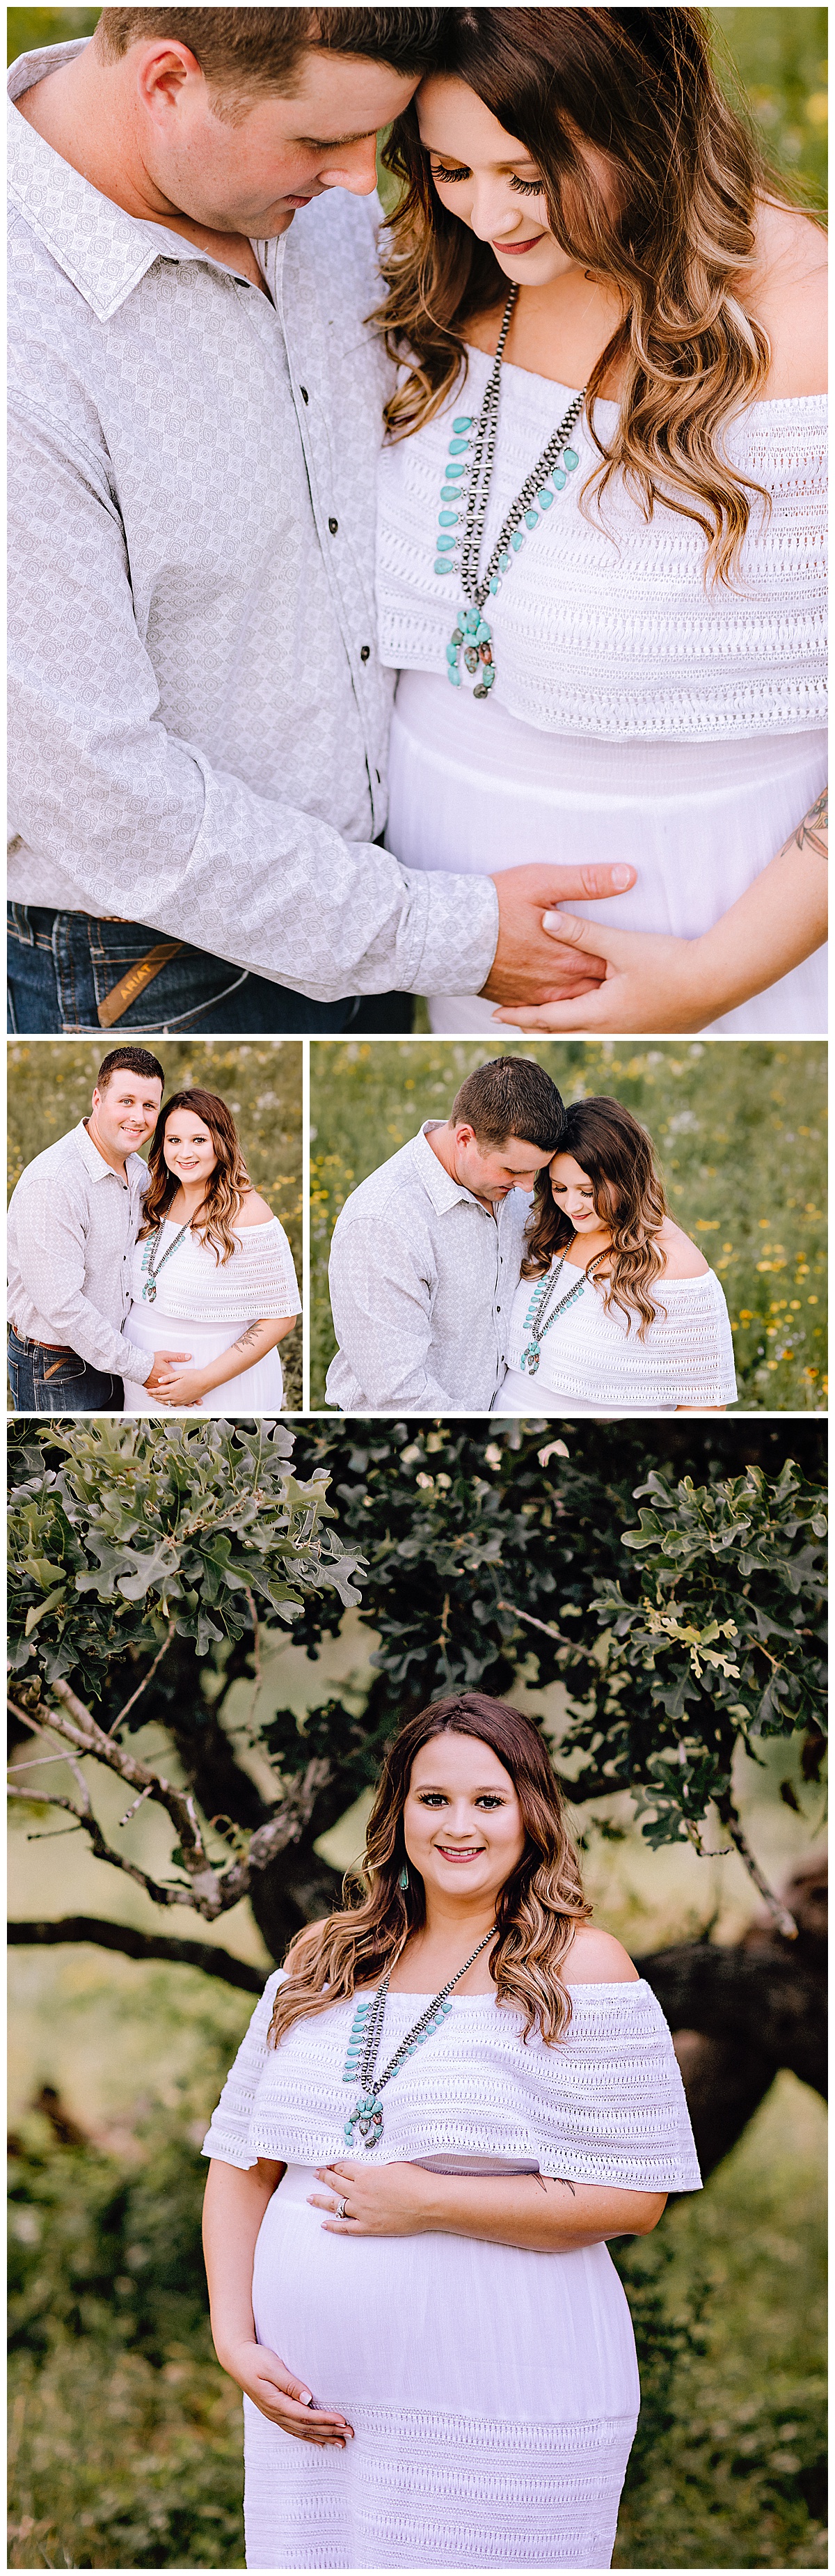 Rustic-Maternity-Session-Texas-Sunset-Carly-Barton-Photography_0069.jpg